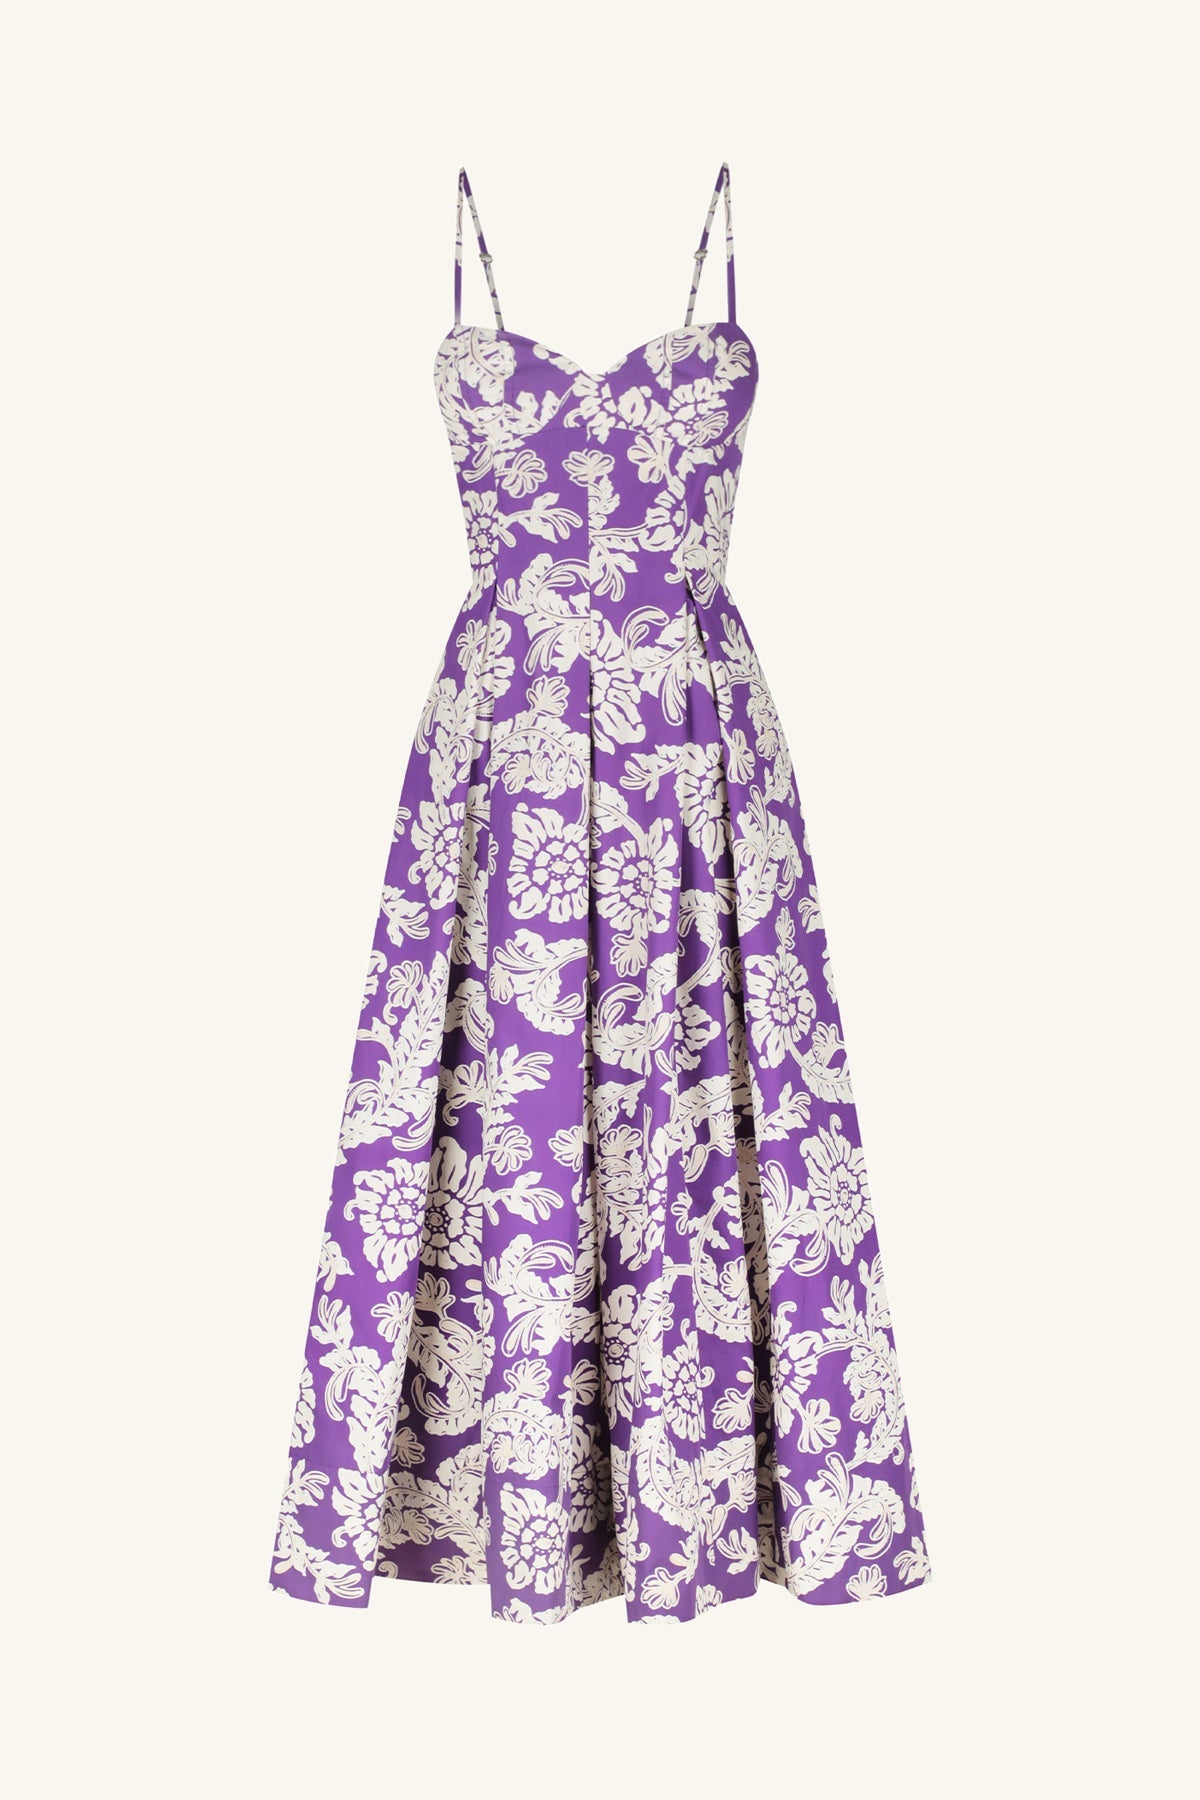 MORE TO COME Genessy Bustier Dress in Purple Floral